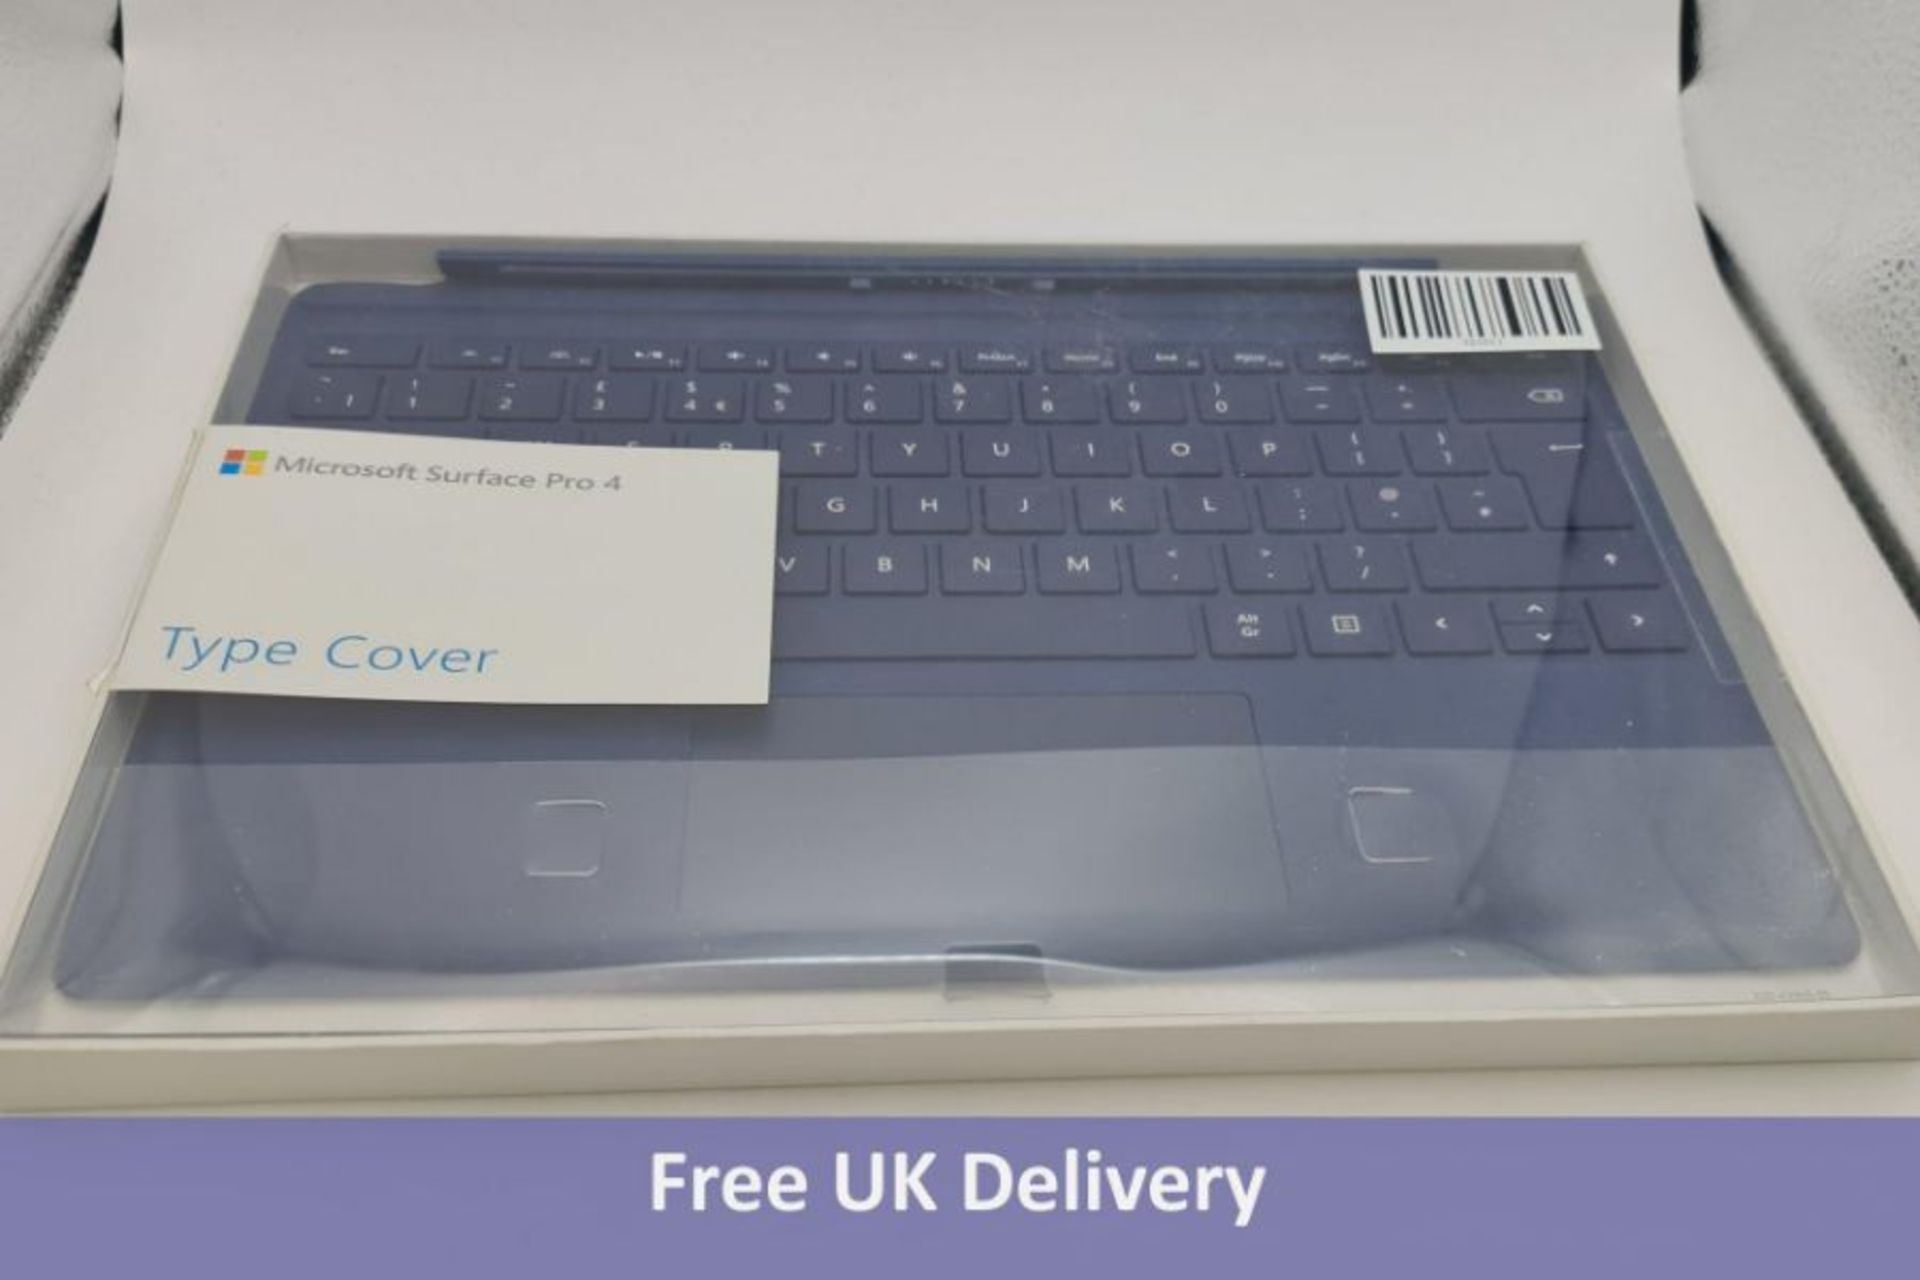 Microsoft Surface Pro 4 Type Cover, Blue, UK layout. Used, in original box